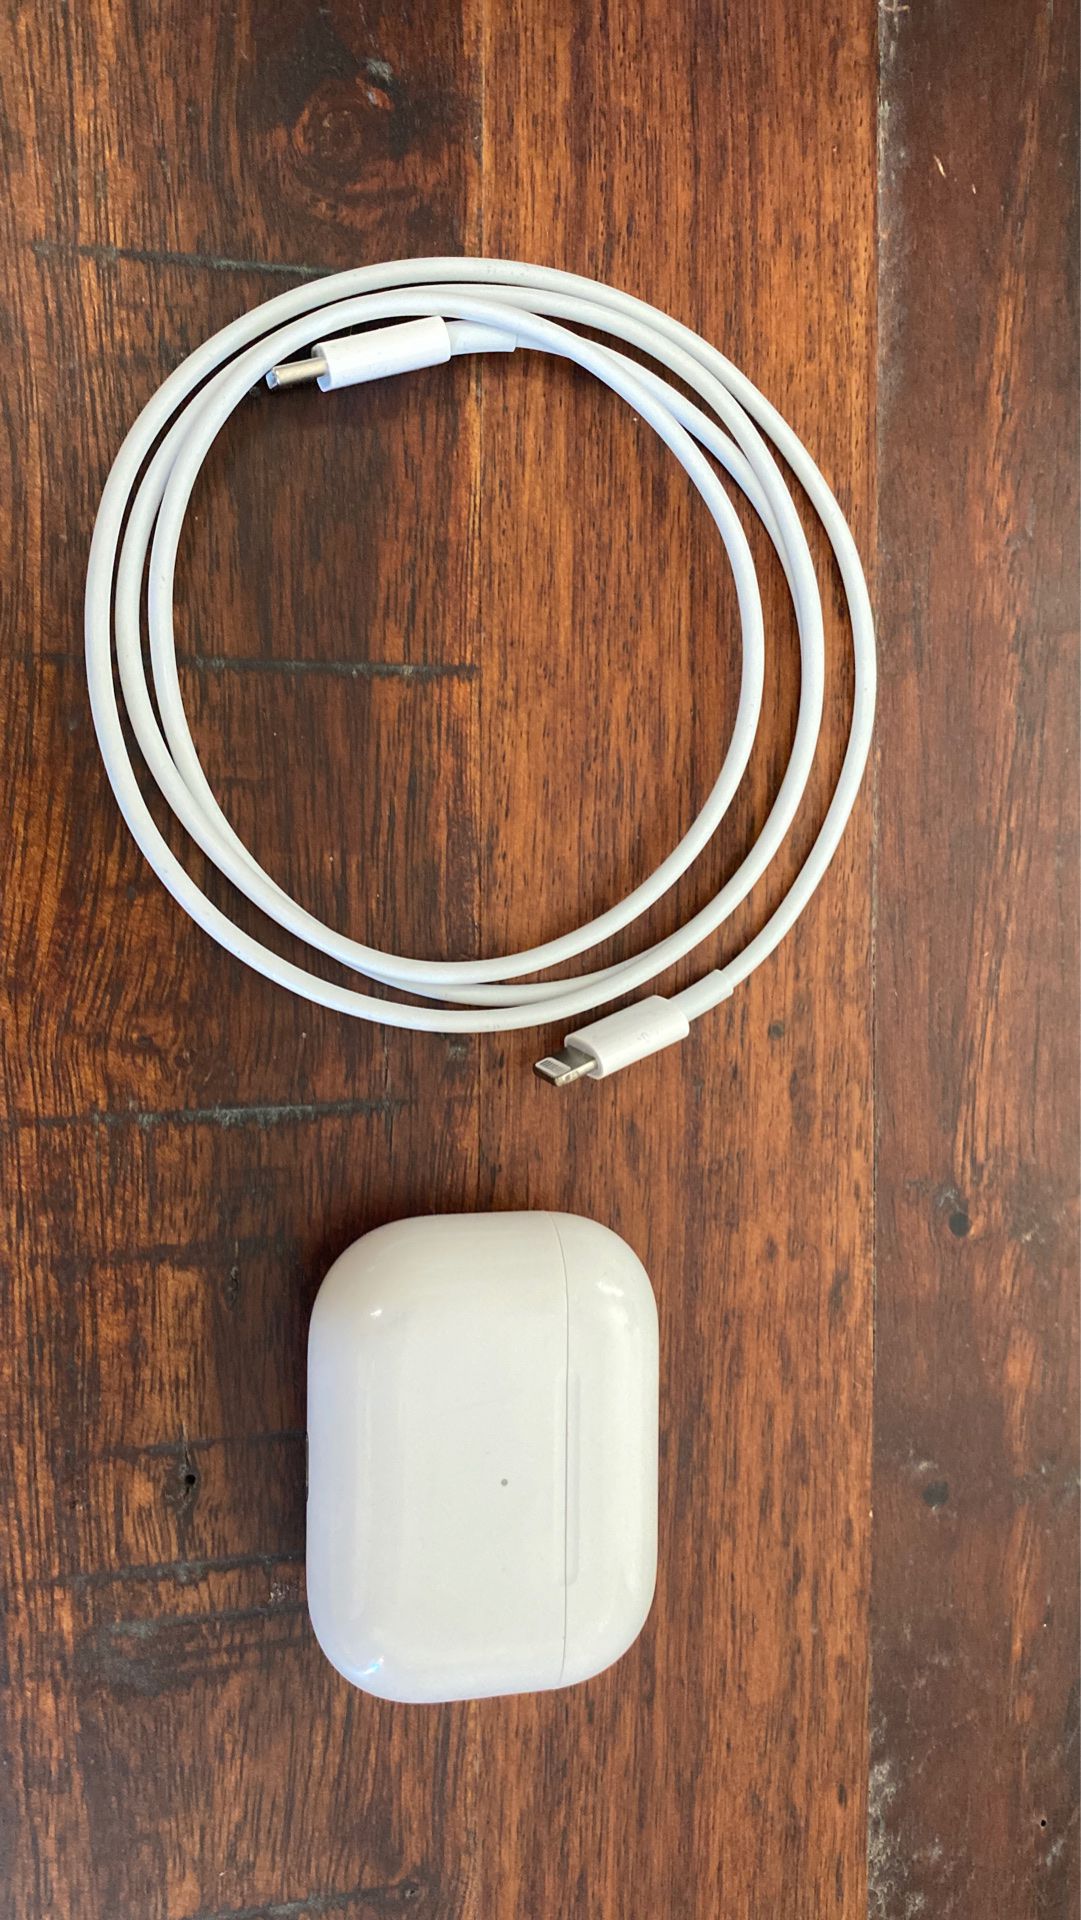 APPLE AIRPOD PROS: BARELY USED/ SANITIZED AND READY FOR USE/